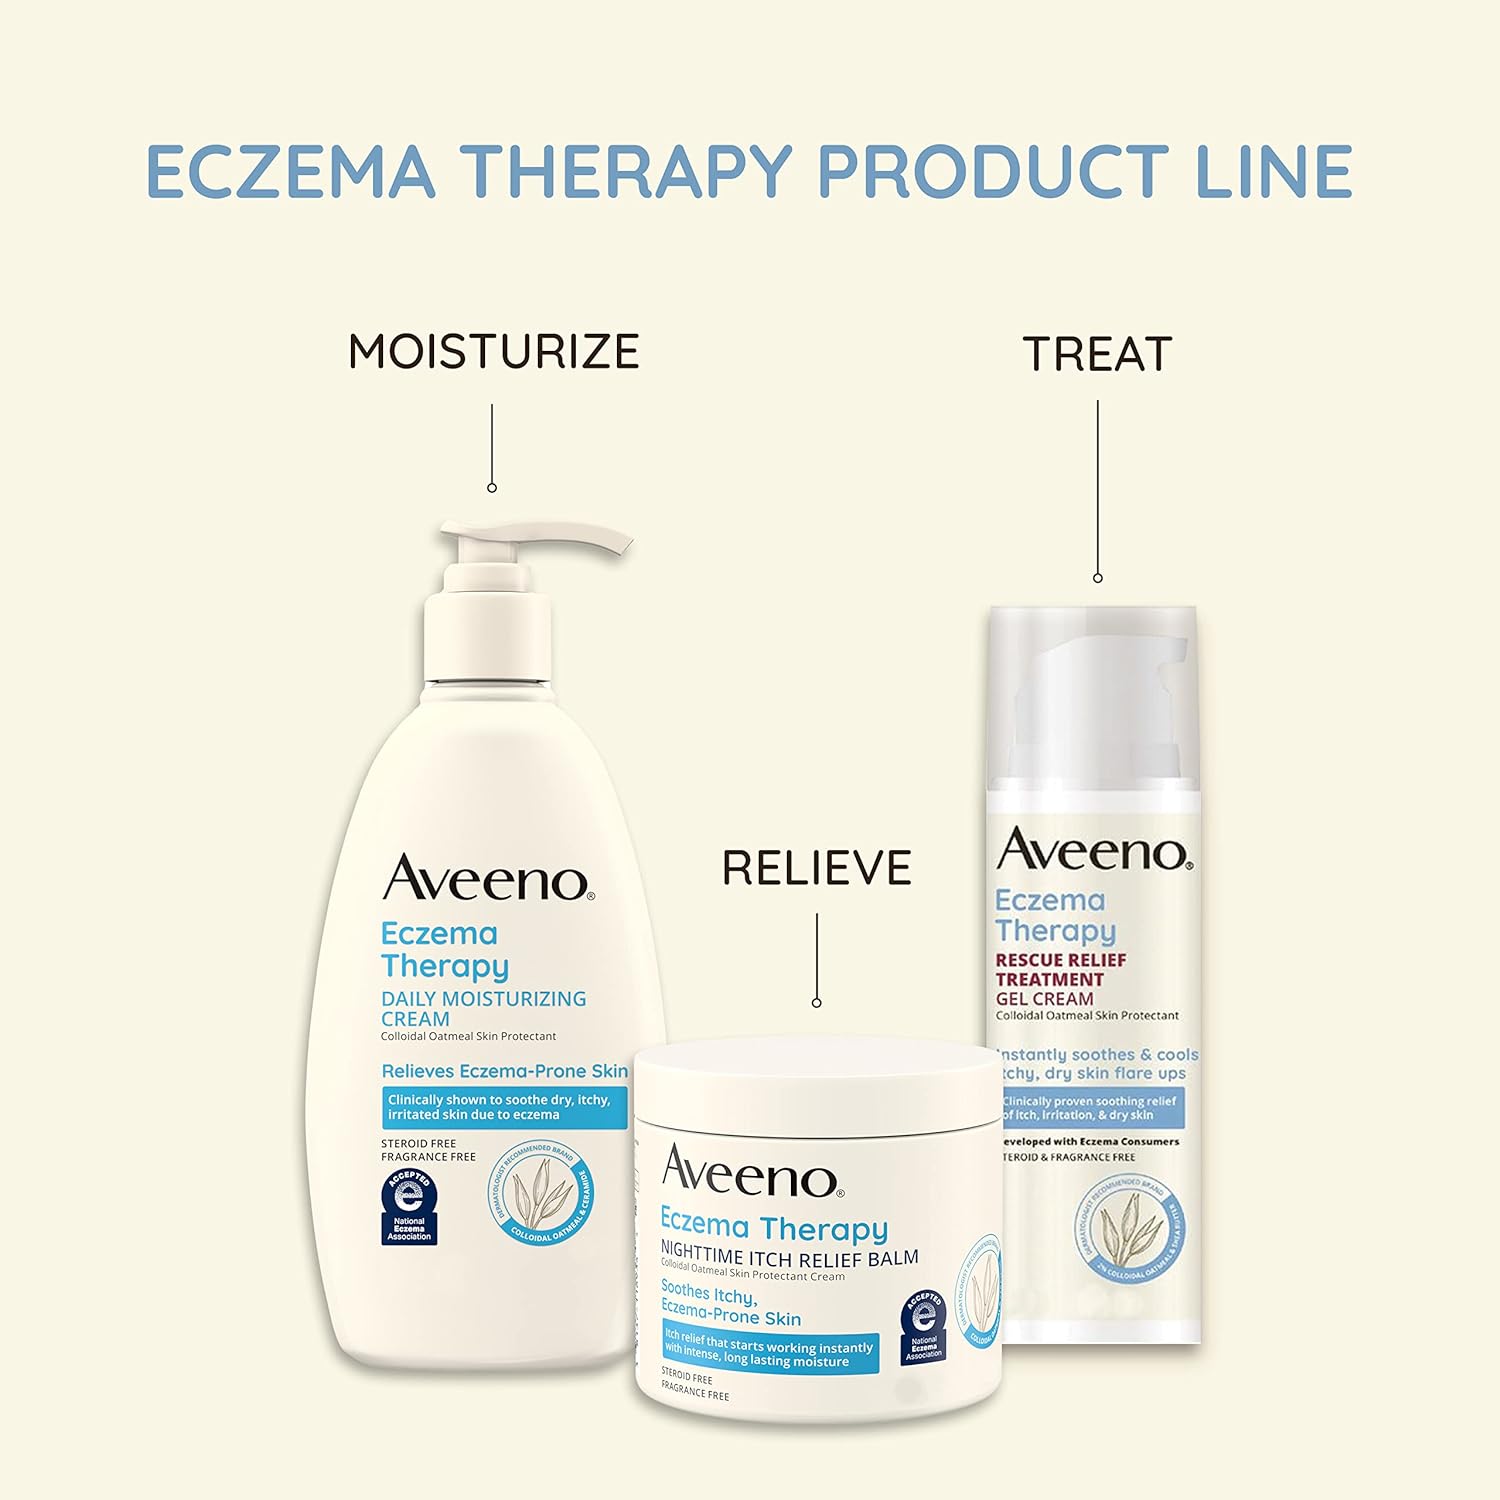 Aveeno Eczema Therapy Rescue Relief Treatment Gel Cream with Colloidal Oatmeal Skin Protectant, Instantly Soothes & Cools Itchy Dry Skin Flare-Ups, Steroid & Fragrance Free, 5.0 fl. oz : Health & Household